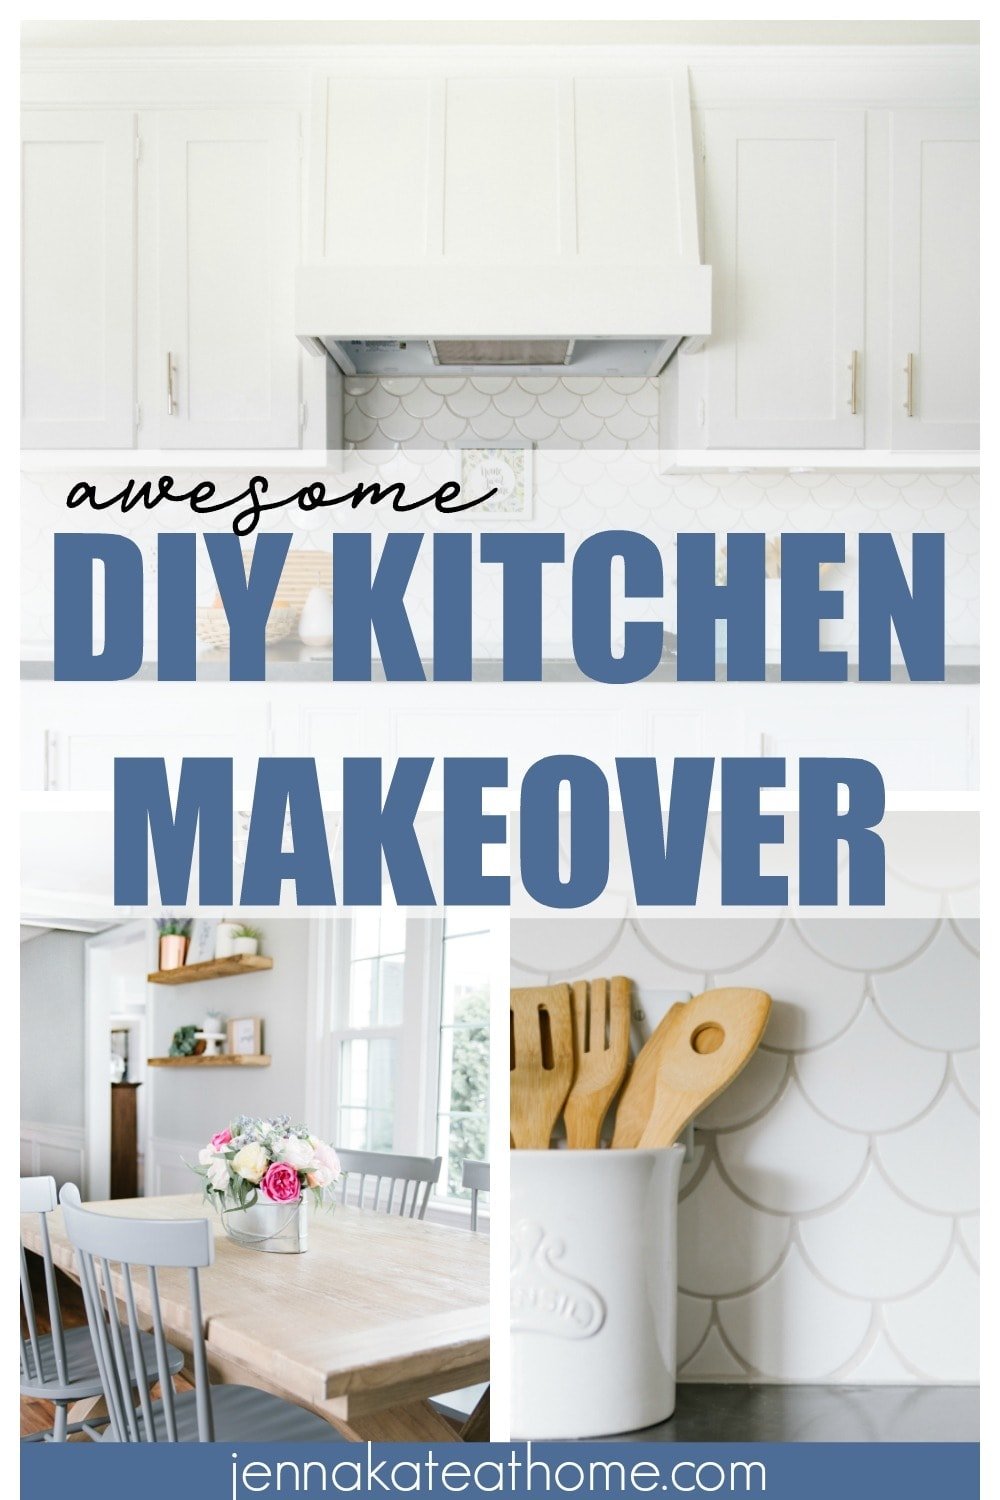 DIY kitchen makeover before and after